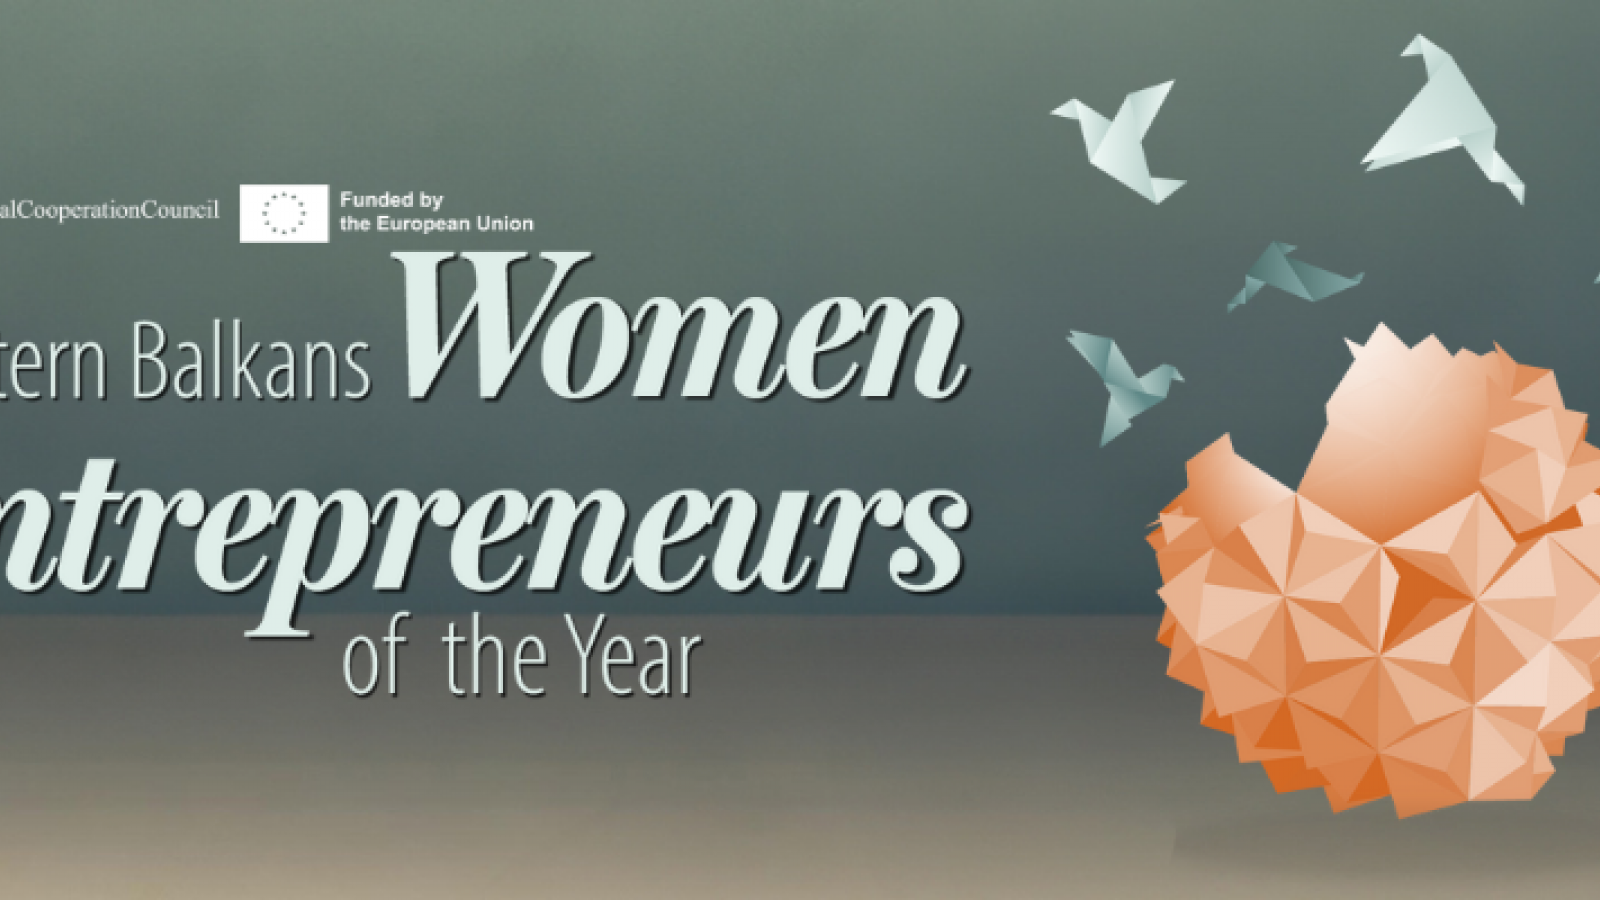 Western Balkans Women Entrepreneurs of the Year to be announced tonight 